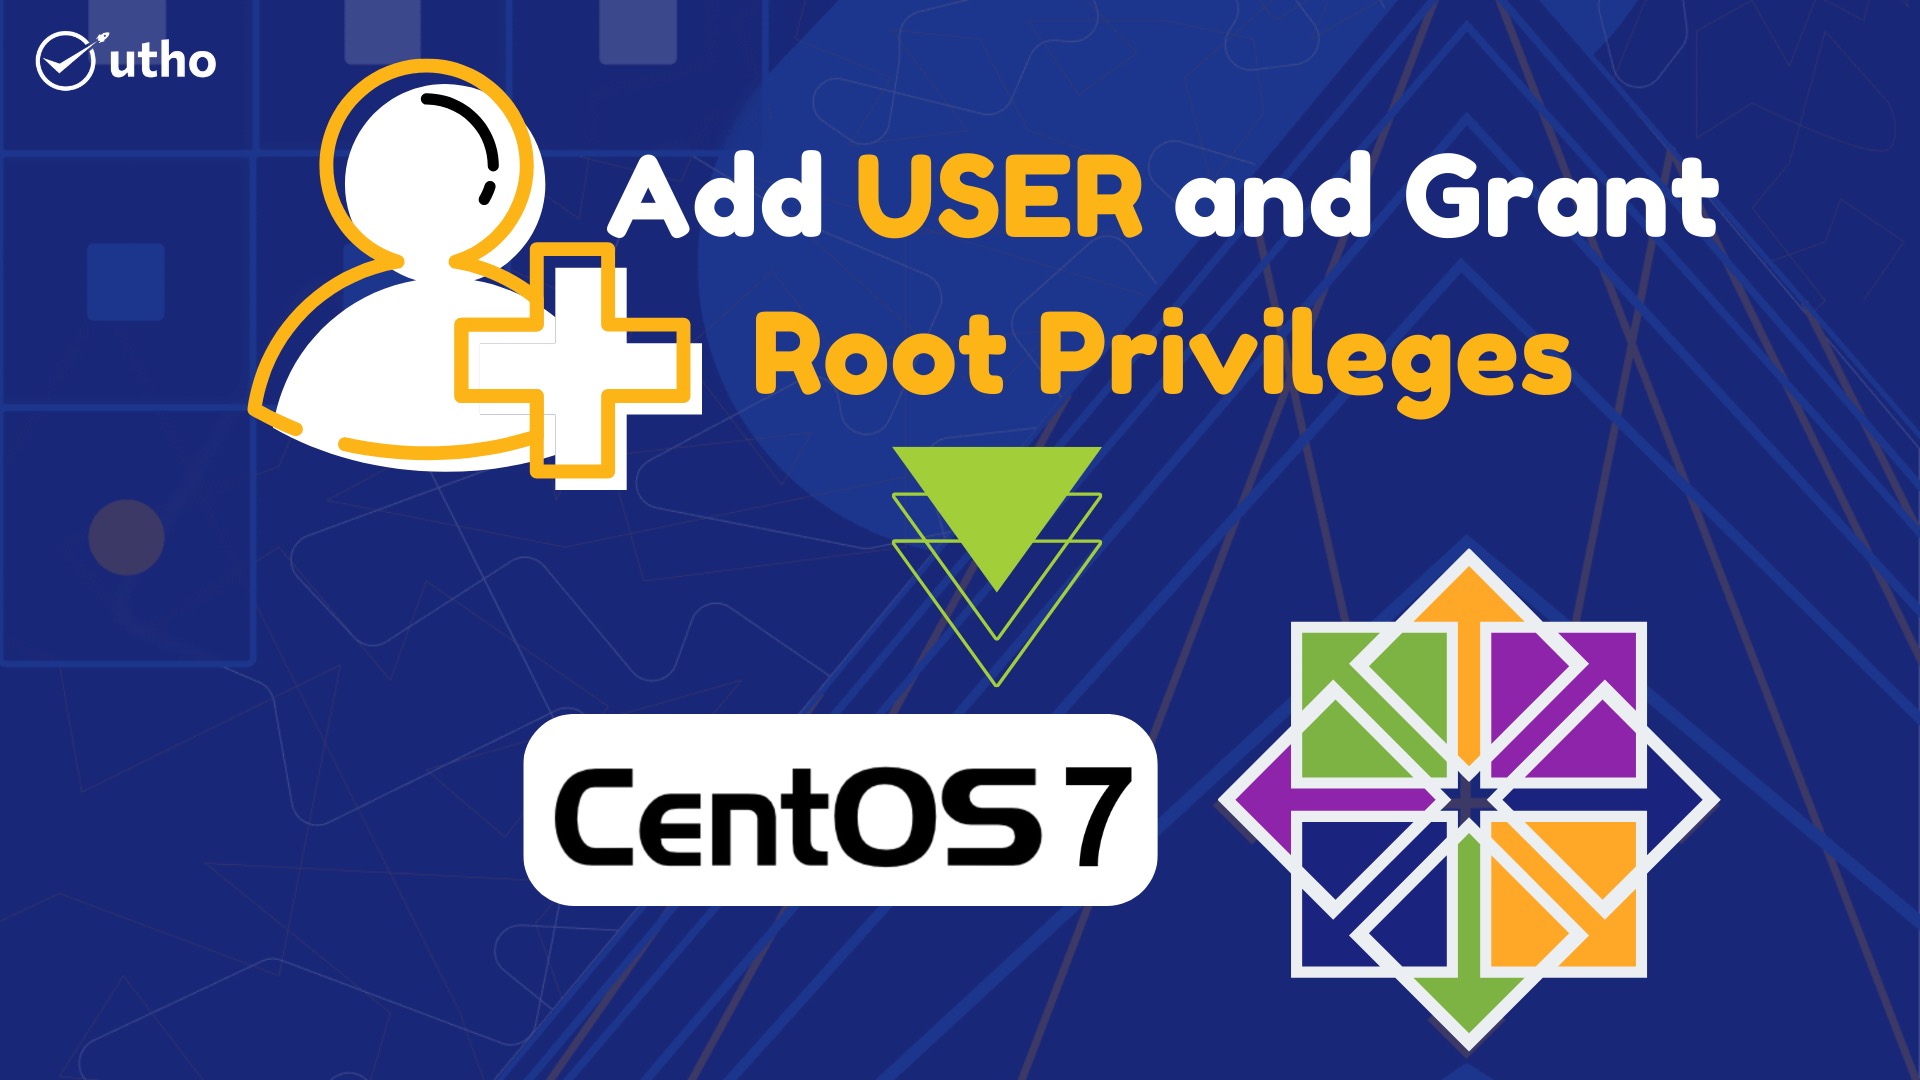 How to Add a User and Grant Root Privileges on CentOS 7